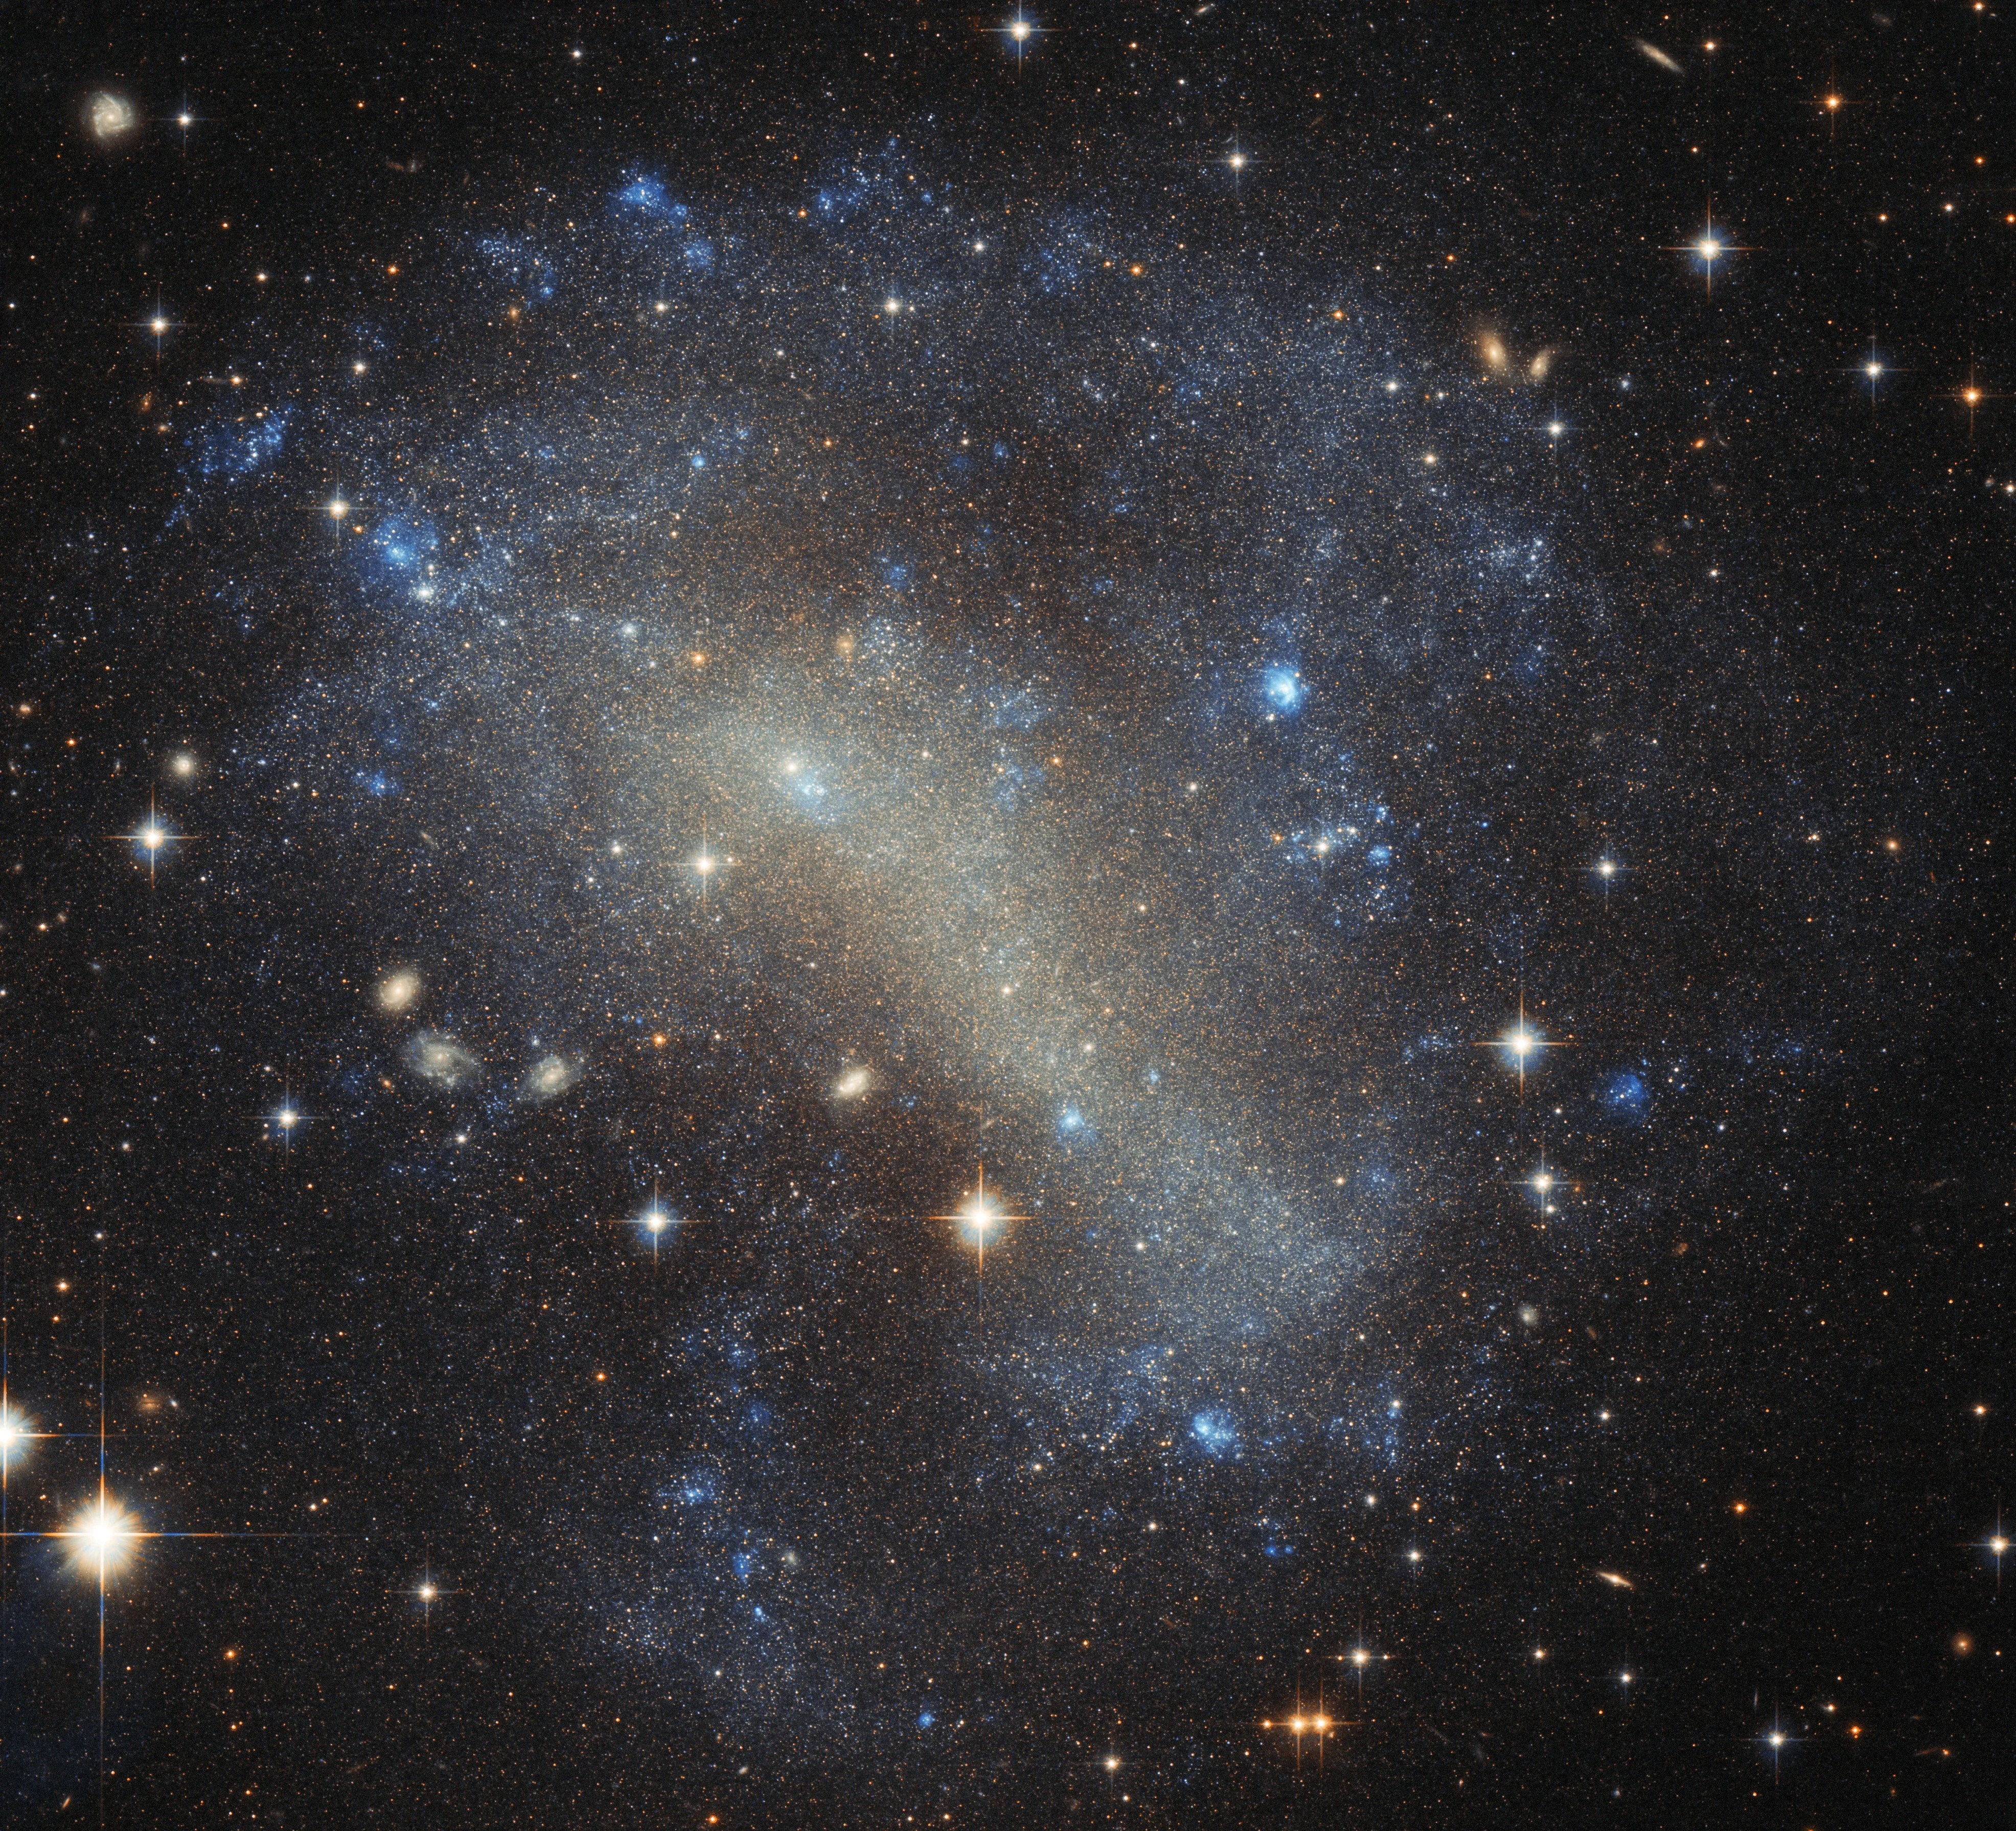 A dense spread of stars with bright flaring stars standing out